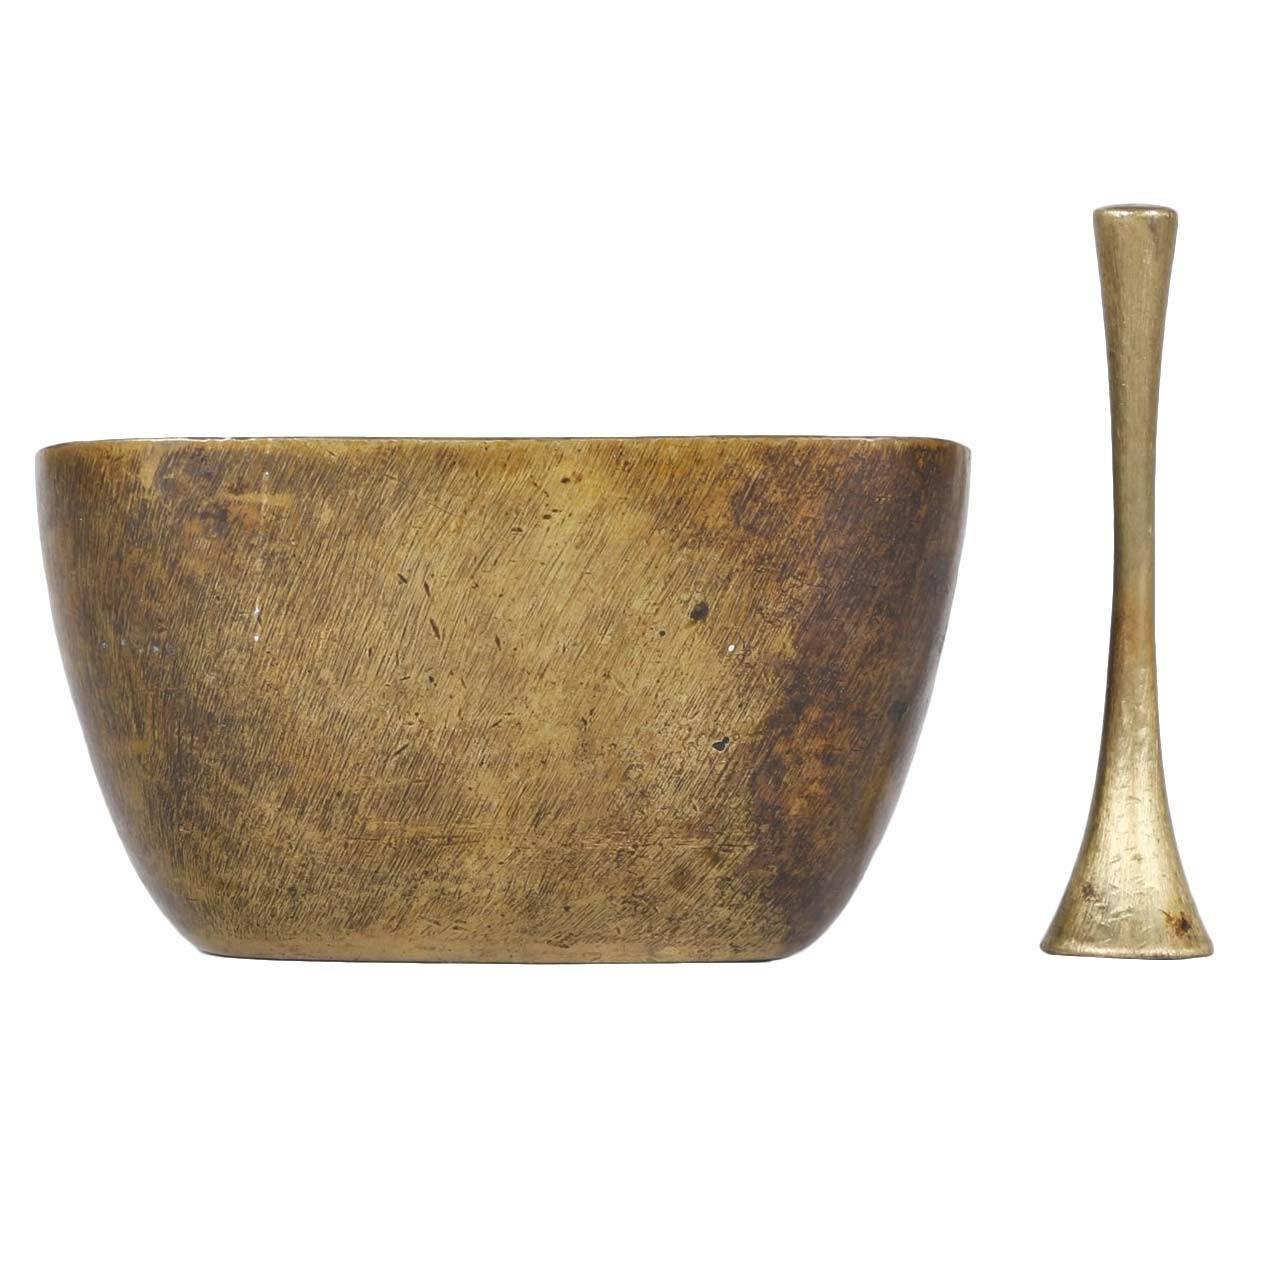 The ashtray comes together with a extinguisher in brass and shows Austrian mid-20th century design at its best. The similarity between Auböck and Hagenauer can be seen very good at this piece.